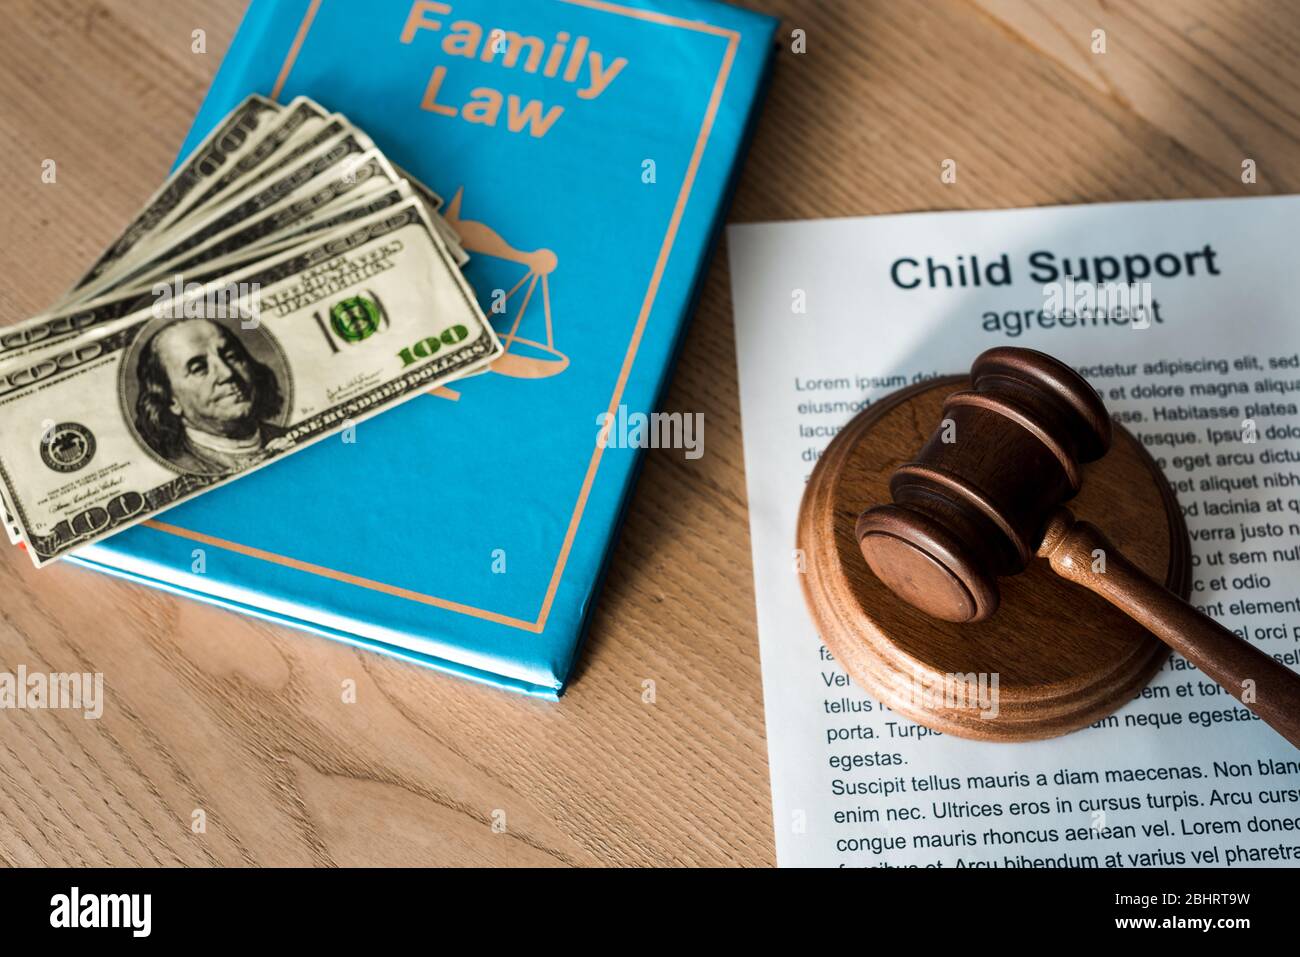 family law child support